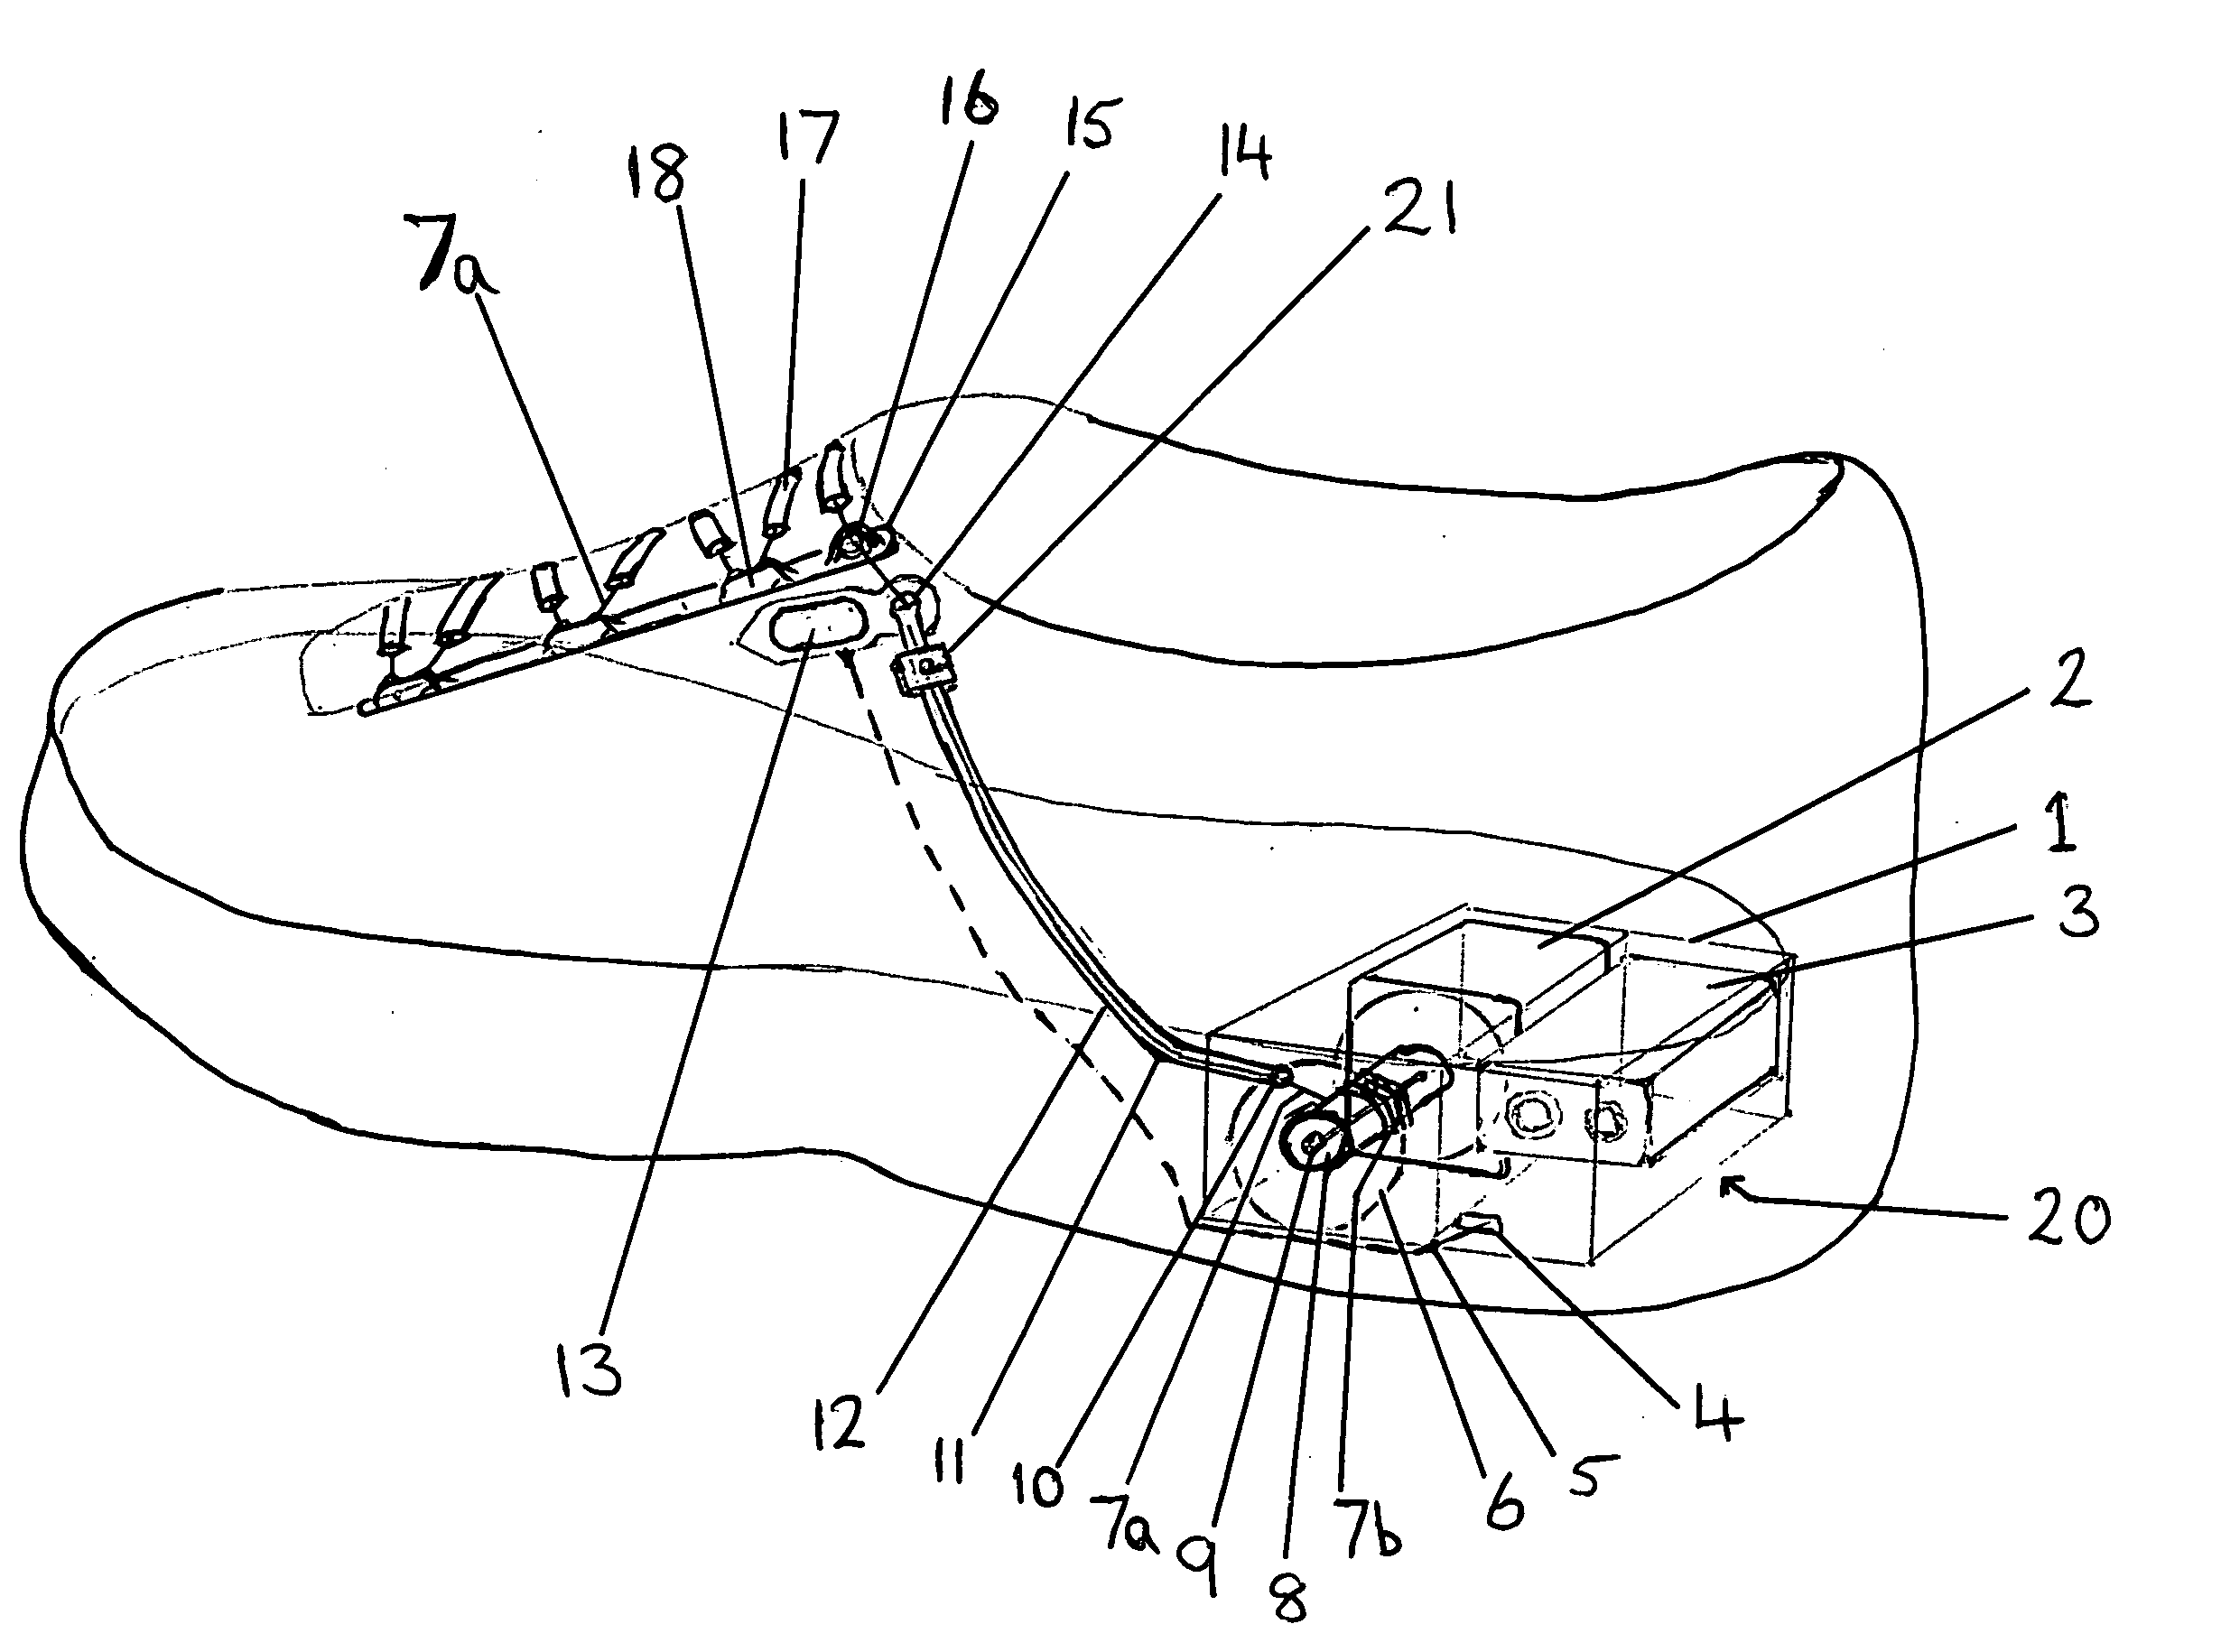 Powered shoe tightening with lace cord guiding system